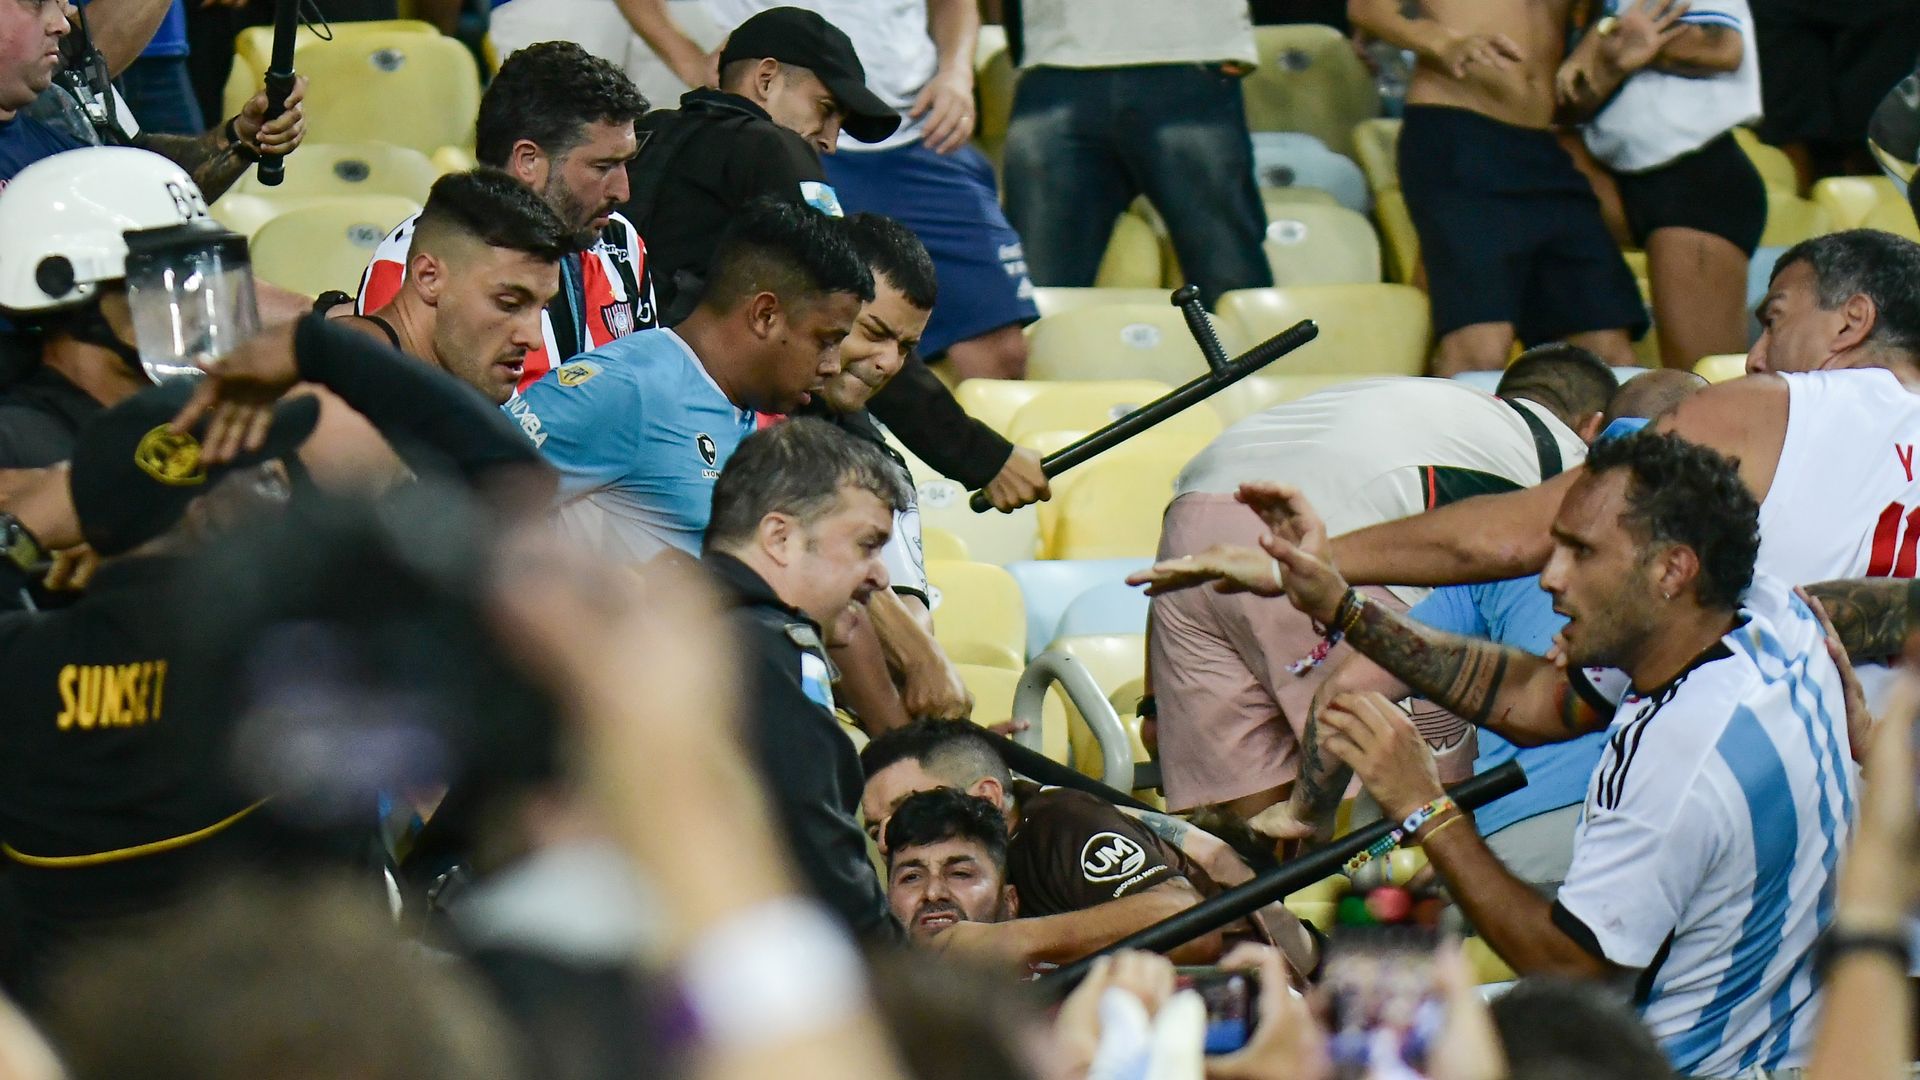 'Greed' led to crowd trouble at the Maracana